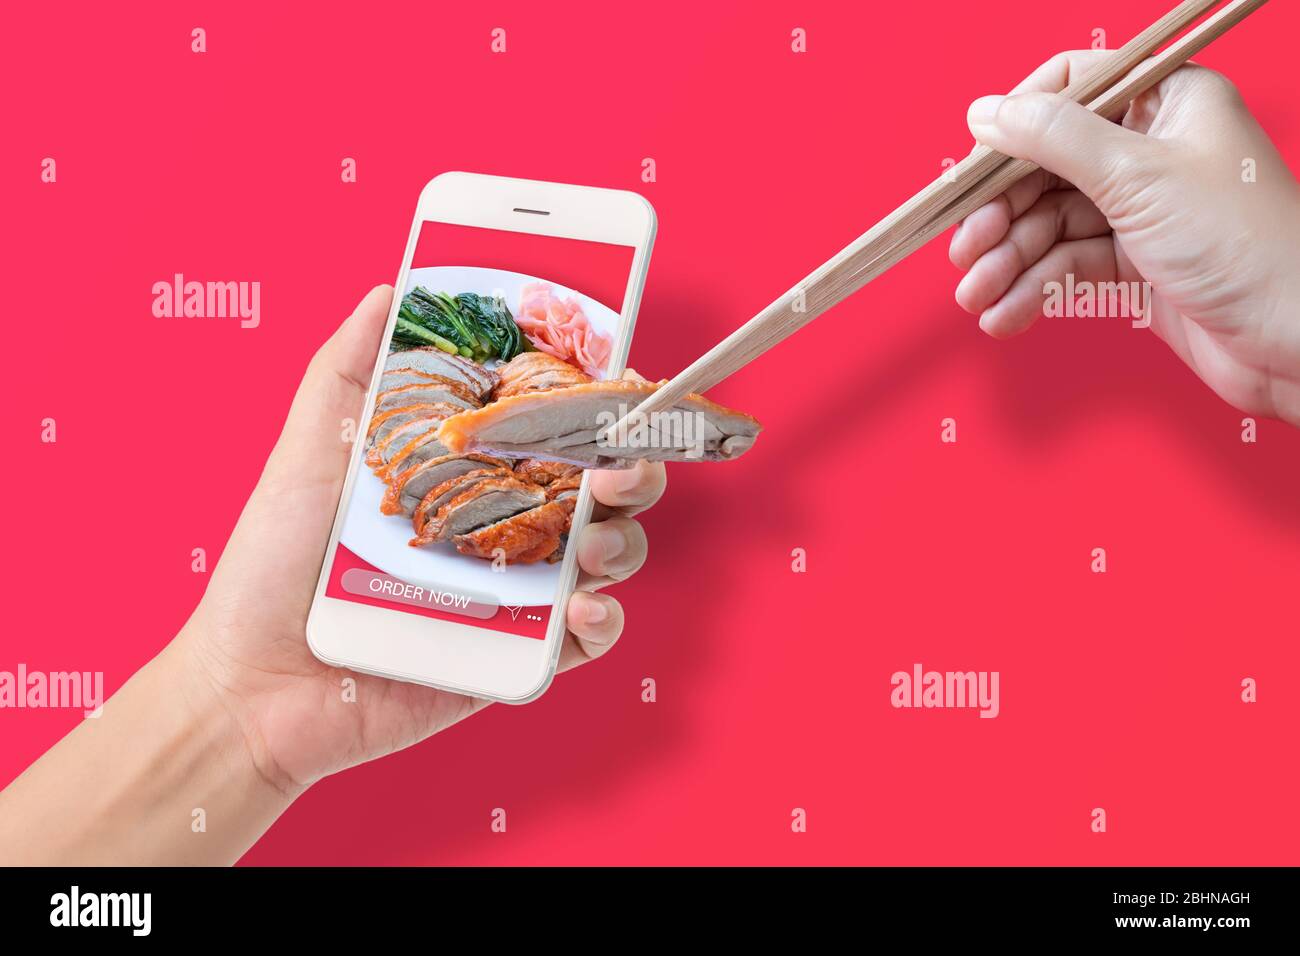 hand using chopsticks to clamp the roasted duck from application to made order food online via mobile smartphone, isolated on red background. Stock Photo